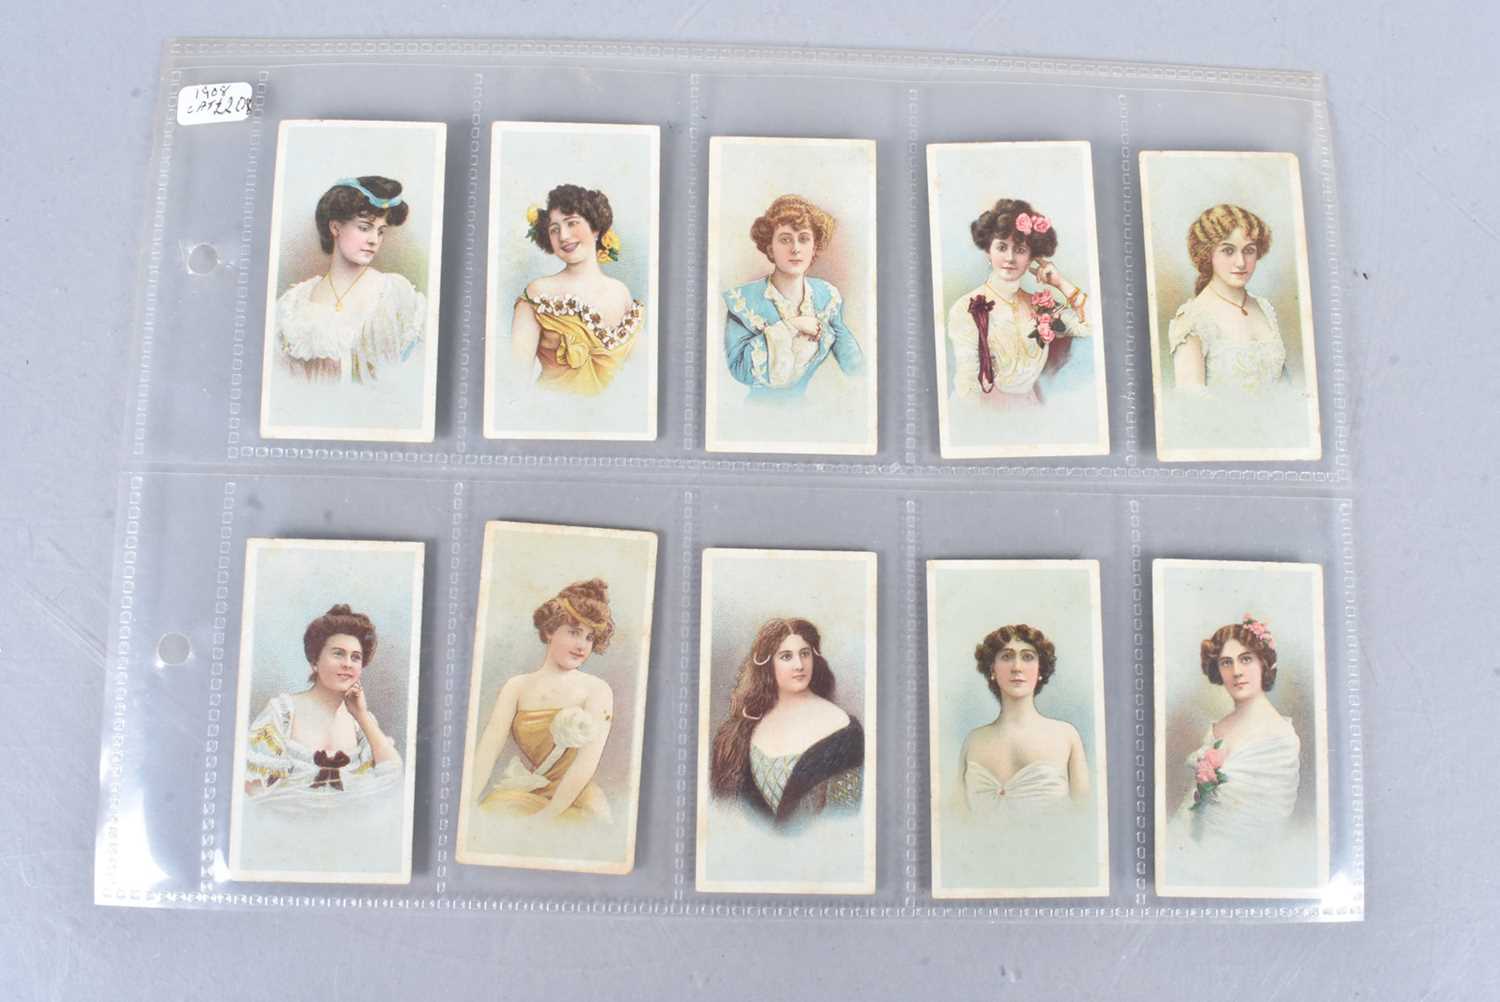 Lot 230 - BAT and Gallahers Beauties Themed Cigarette Cards